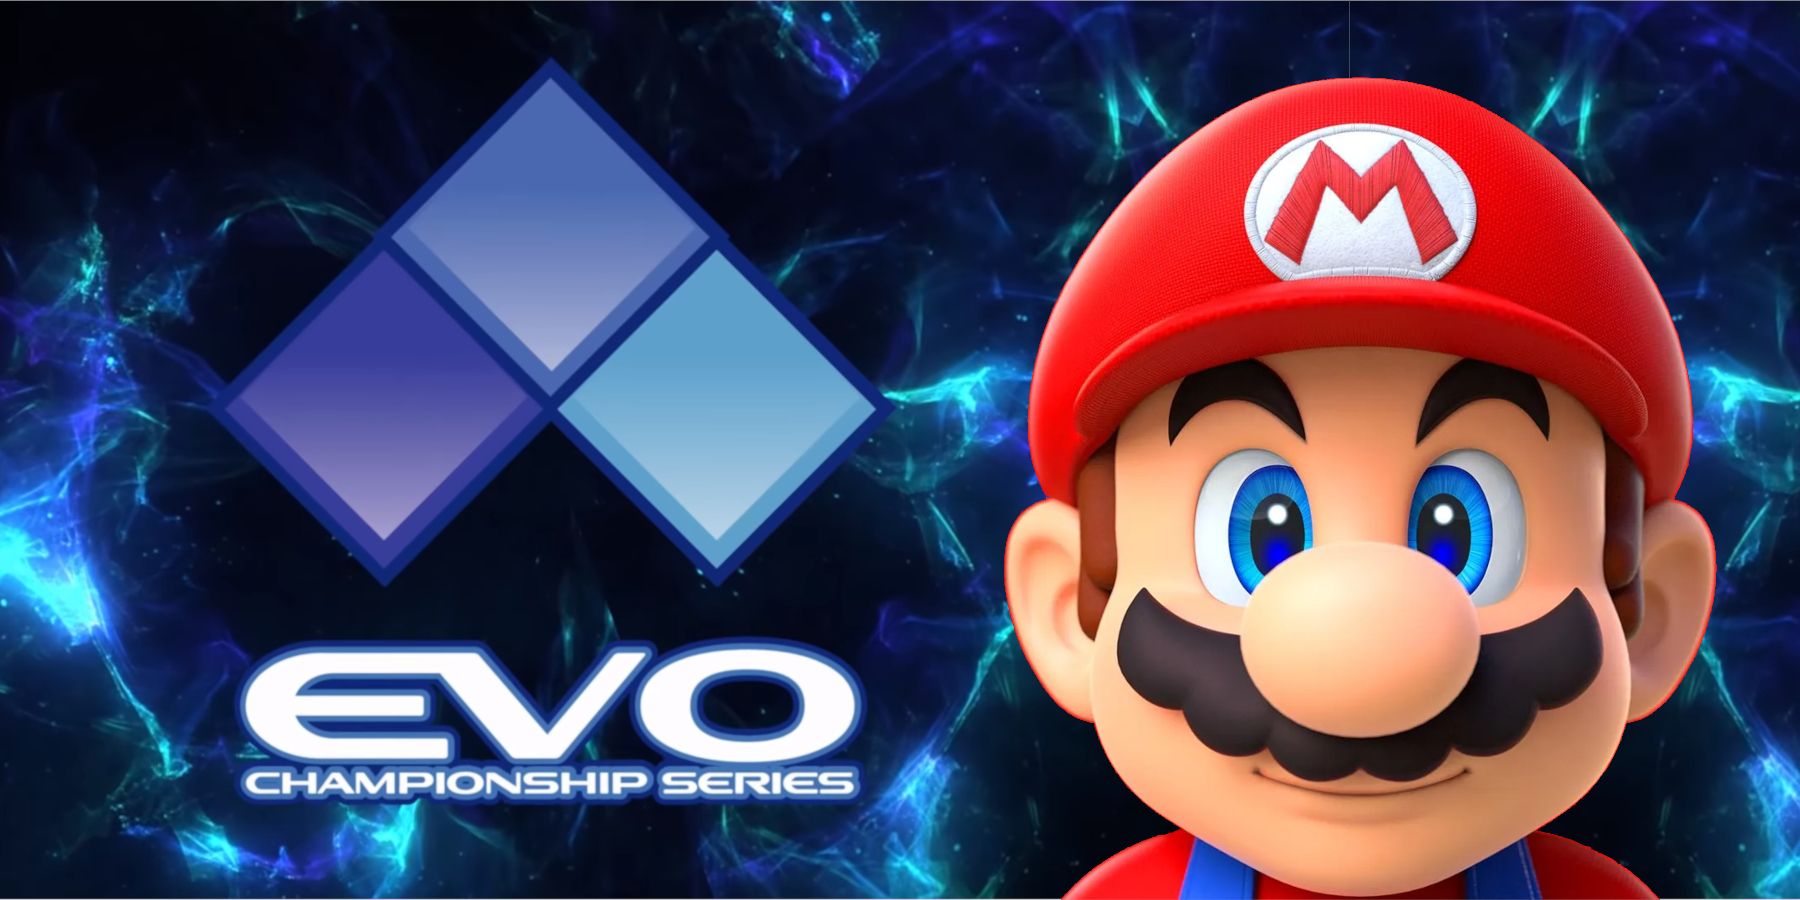 Mario appears next to the logo for EVO Championship Series